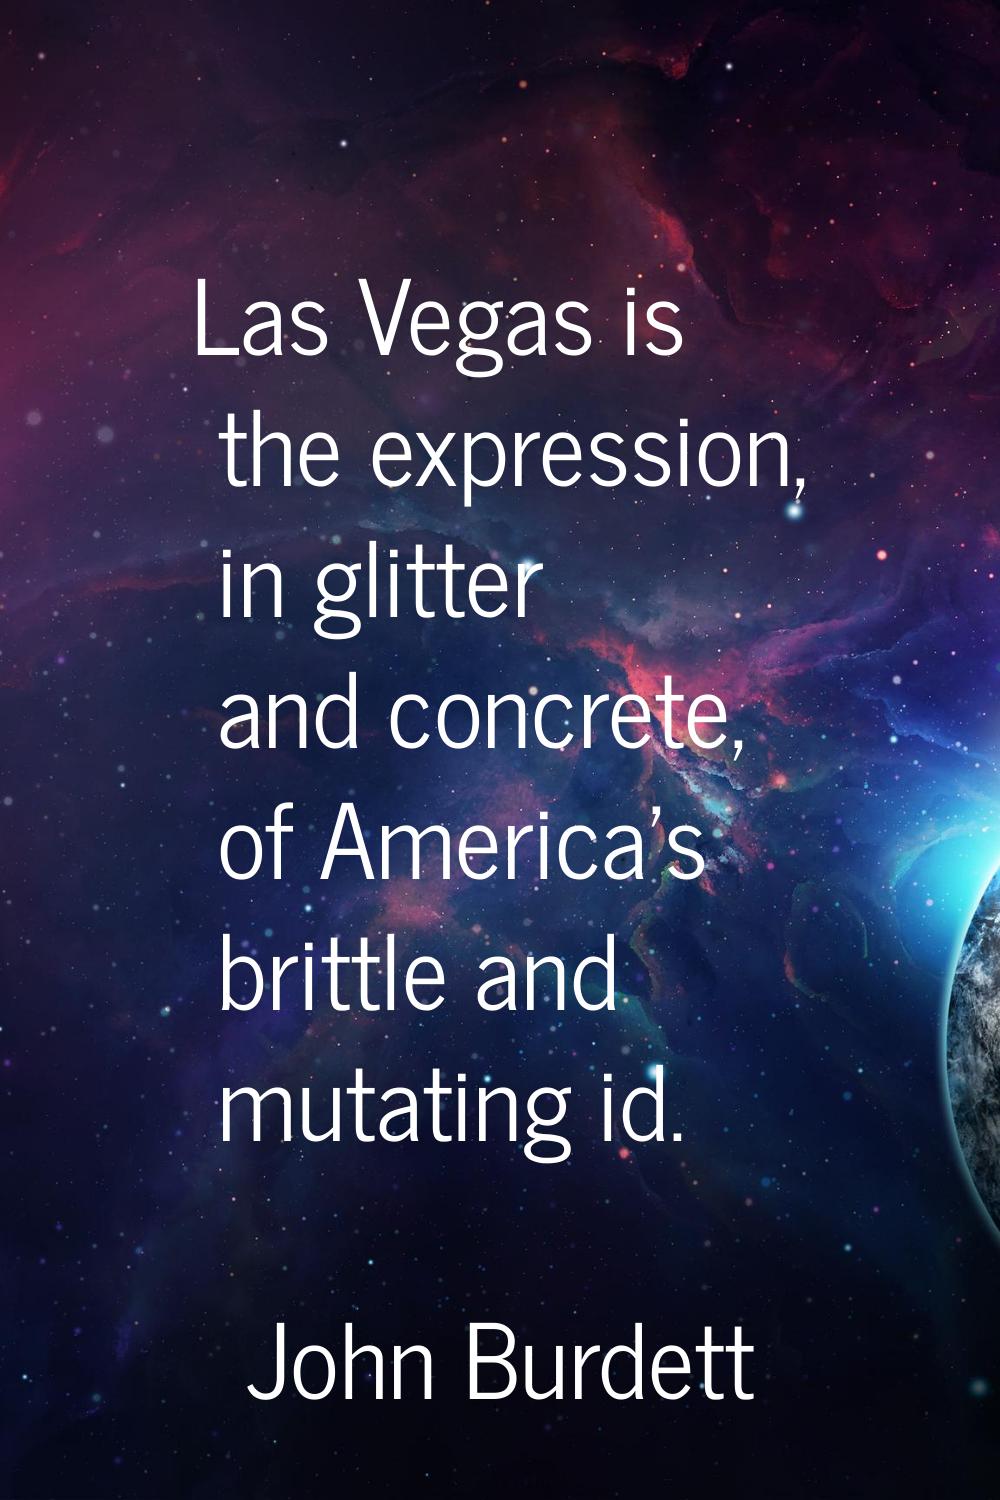 Las Vegas is the expression, in glitter and concrete, of America's brittle and mutating id.